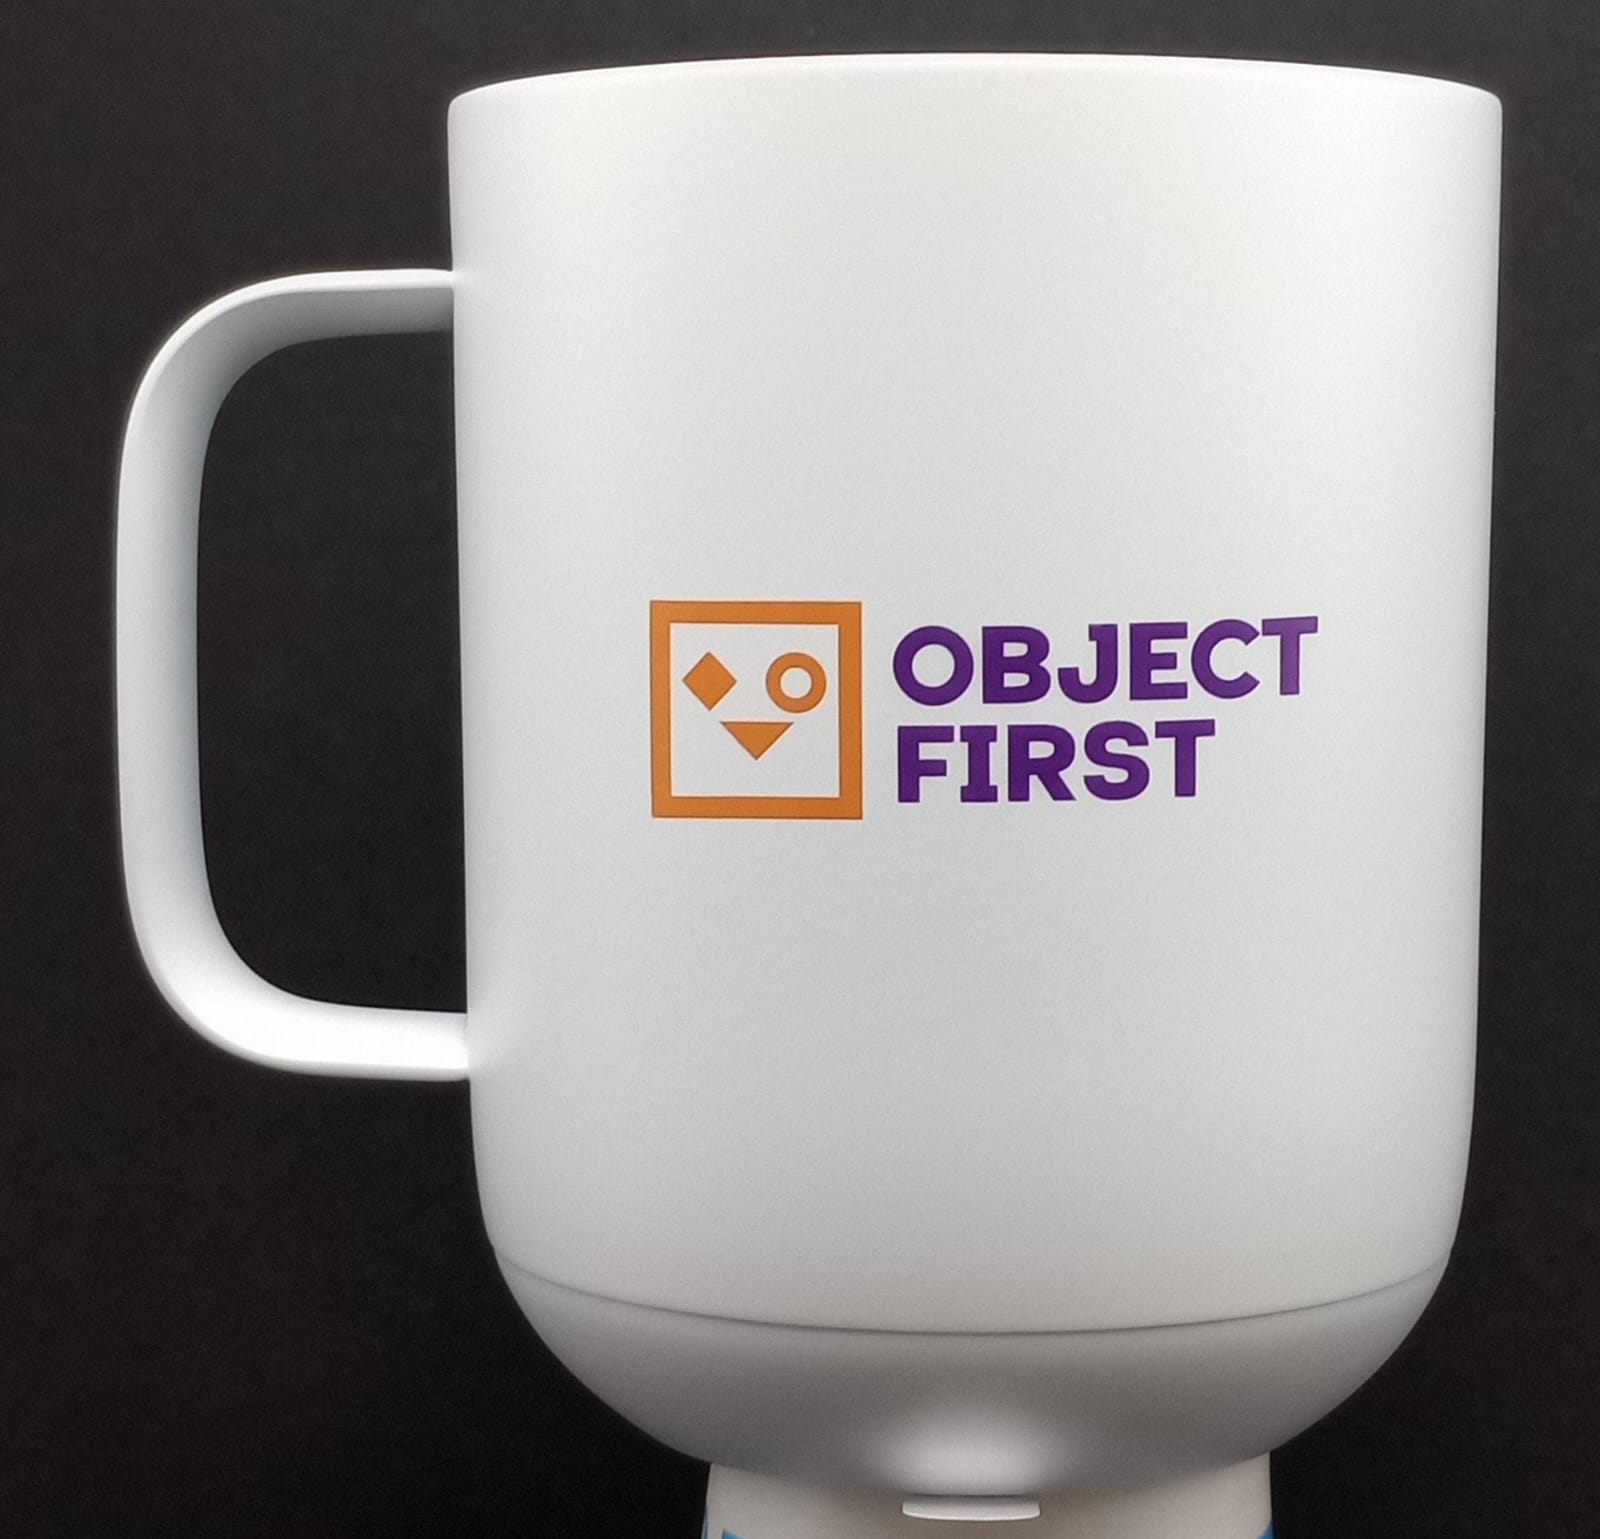 The Tech-Infused Brew: The Ember Mug’s Promotional Power